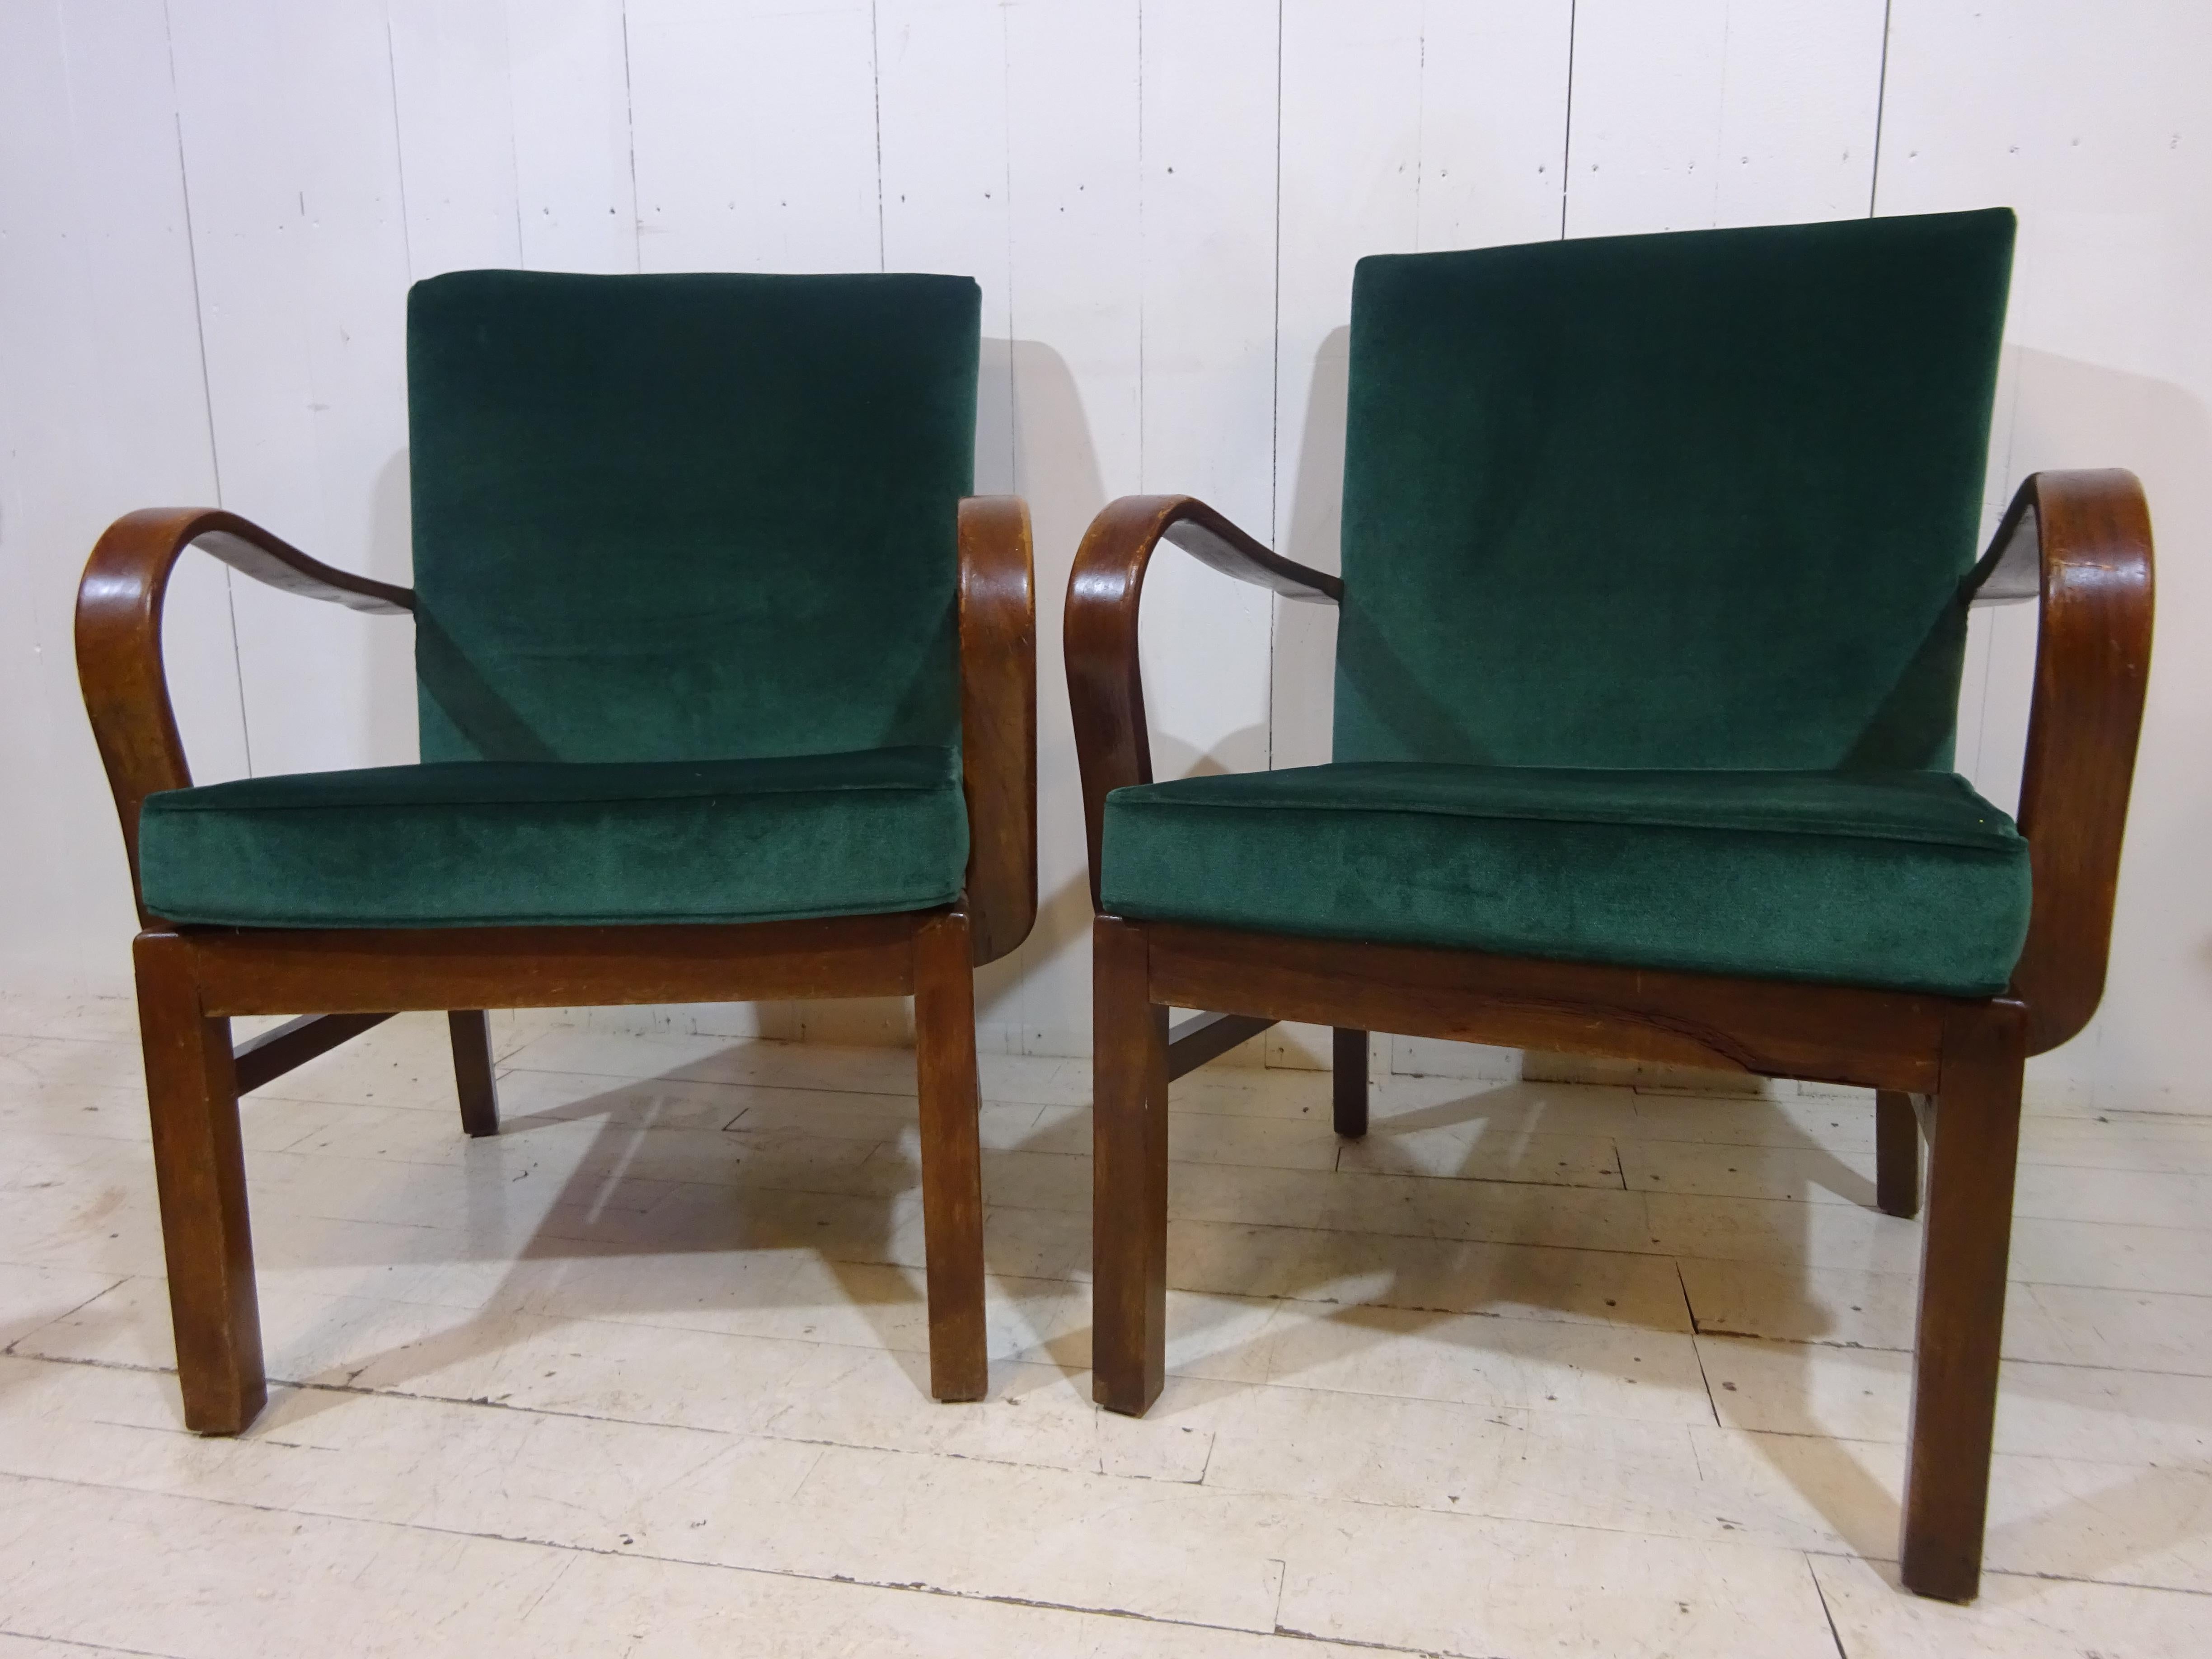 Parker Knoll Armchair

Love the shape of these fabulous chairs. 

Parker Knoll is a British furniture manufacturing company, formed in 1931 by British furniture manufacturer Frederick Parker and Willi Knoll, a German inventor of a new form of